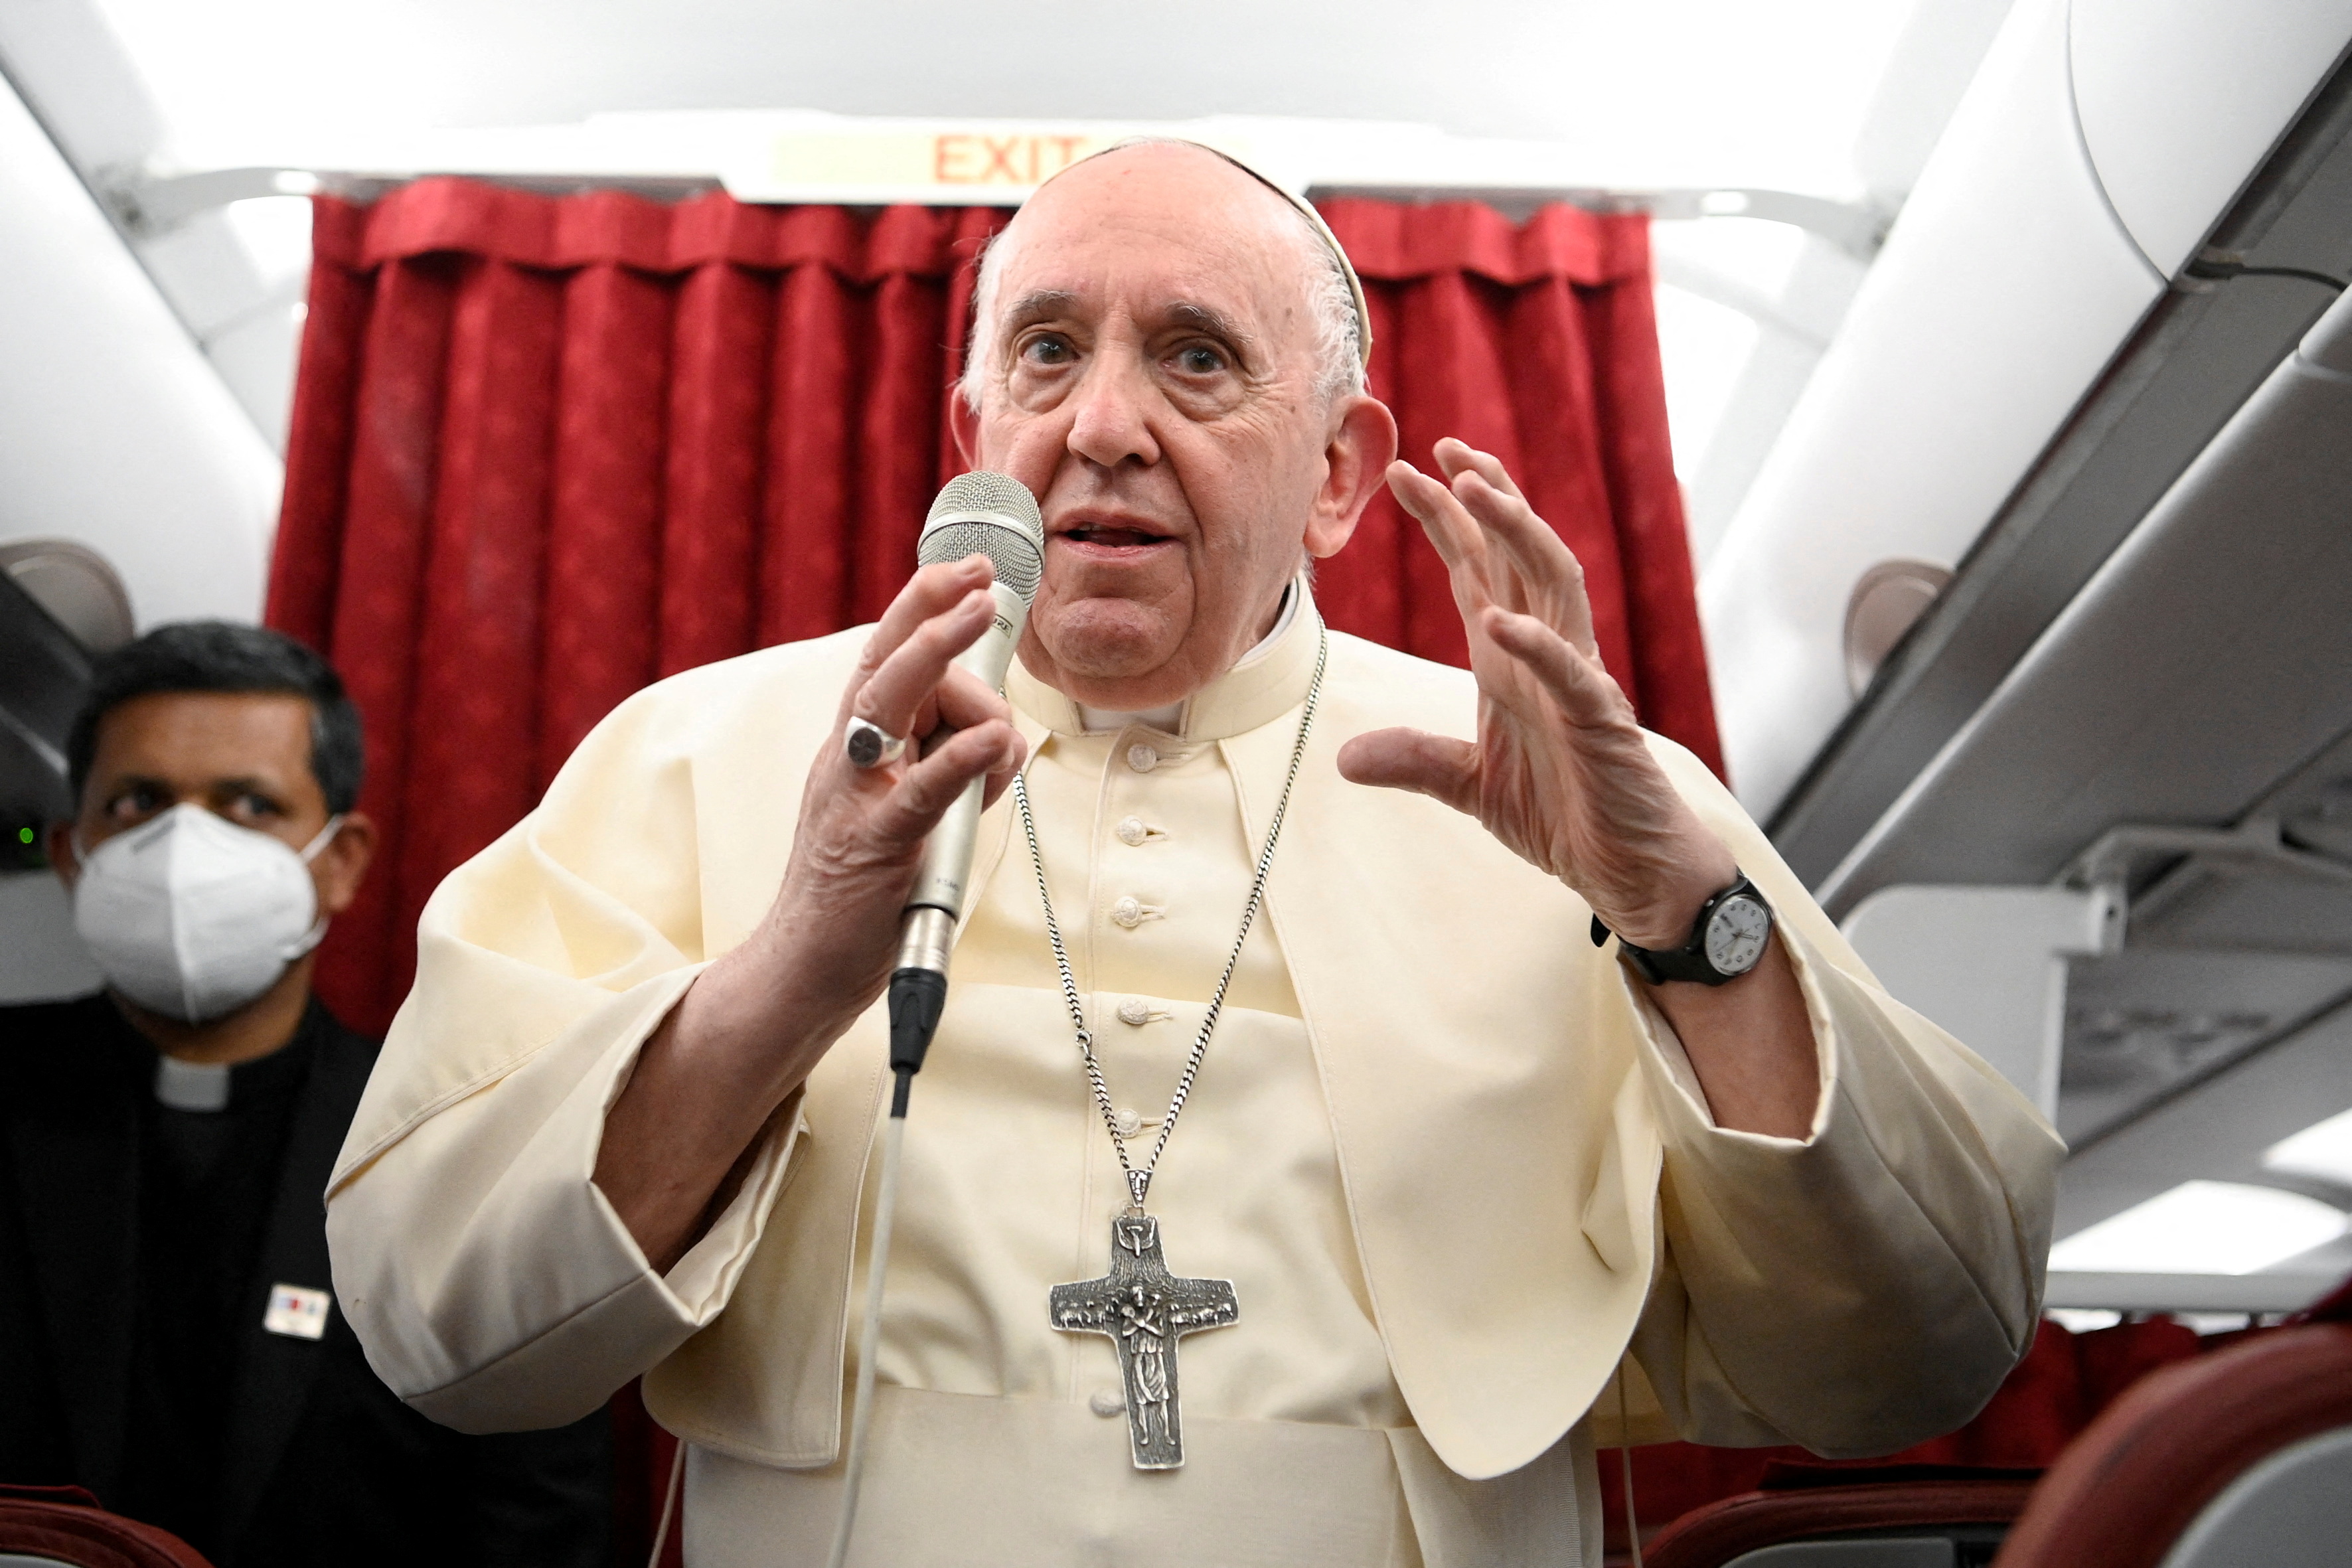 Pope Francis pays tribute to journalists killed in Ukraine conflict